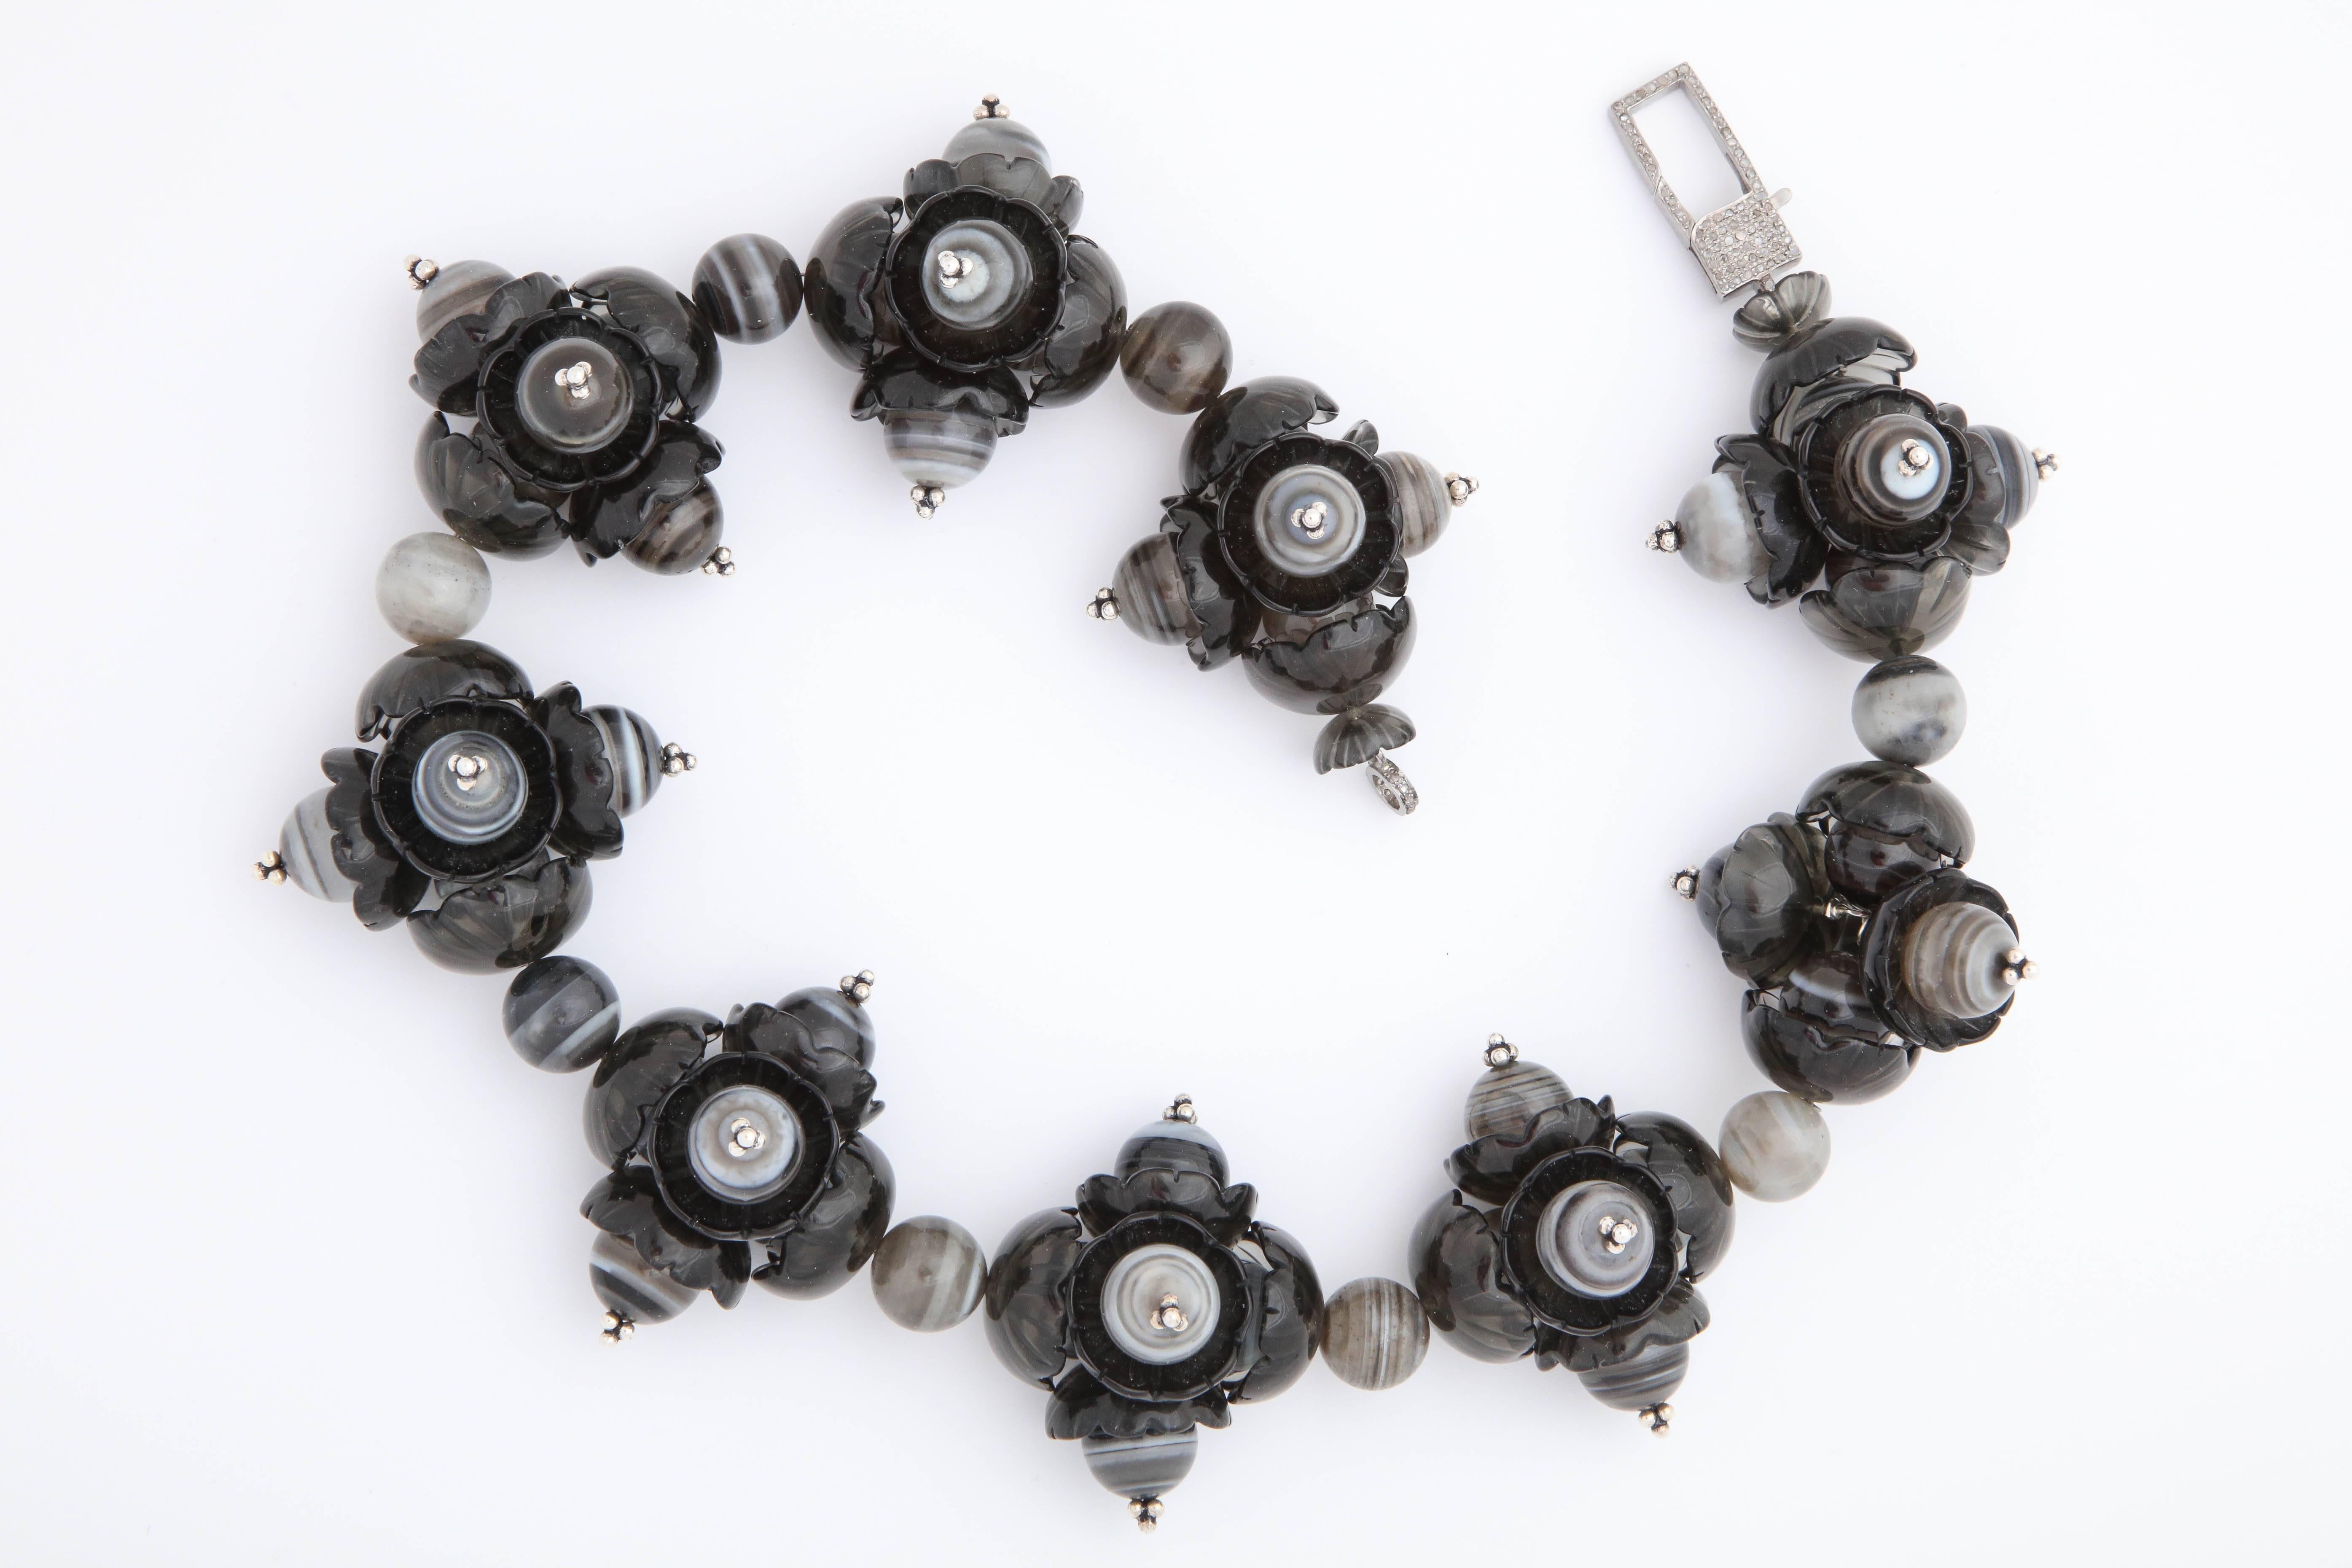 A wreath necklace composed of smokey quartz flowers, banded agate beads and rhodium plated sterling silver flower headpins. There is a rhodium plated sterling silver and diamond clasp.
Length: 18.50 inches